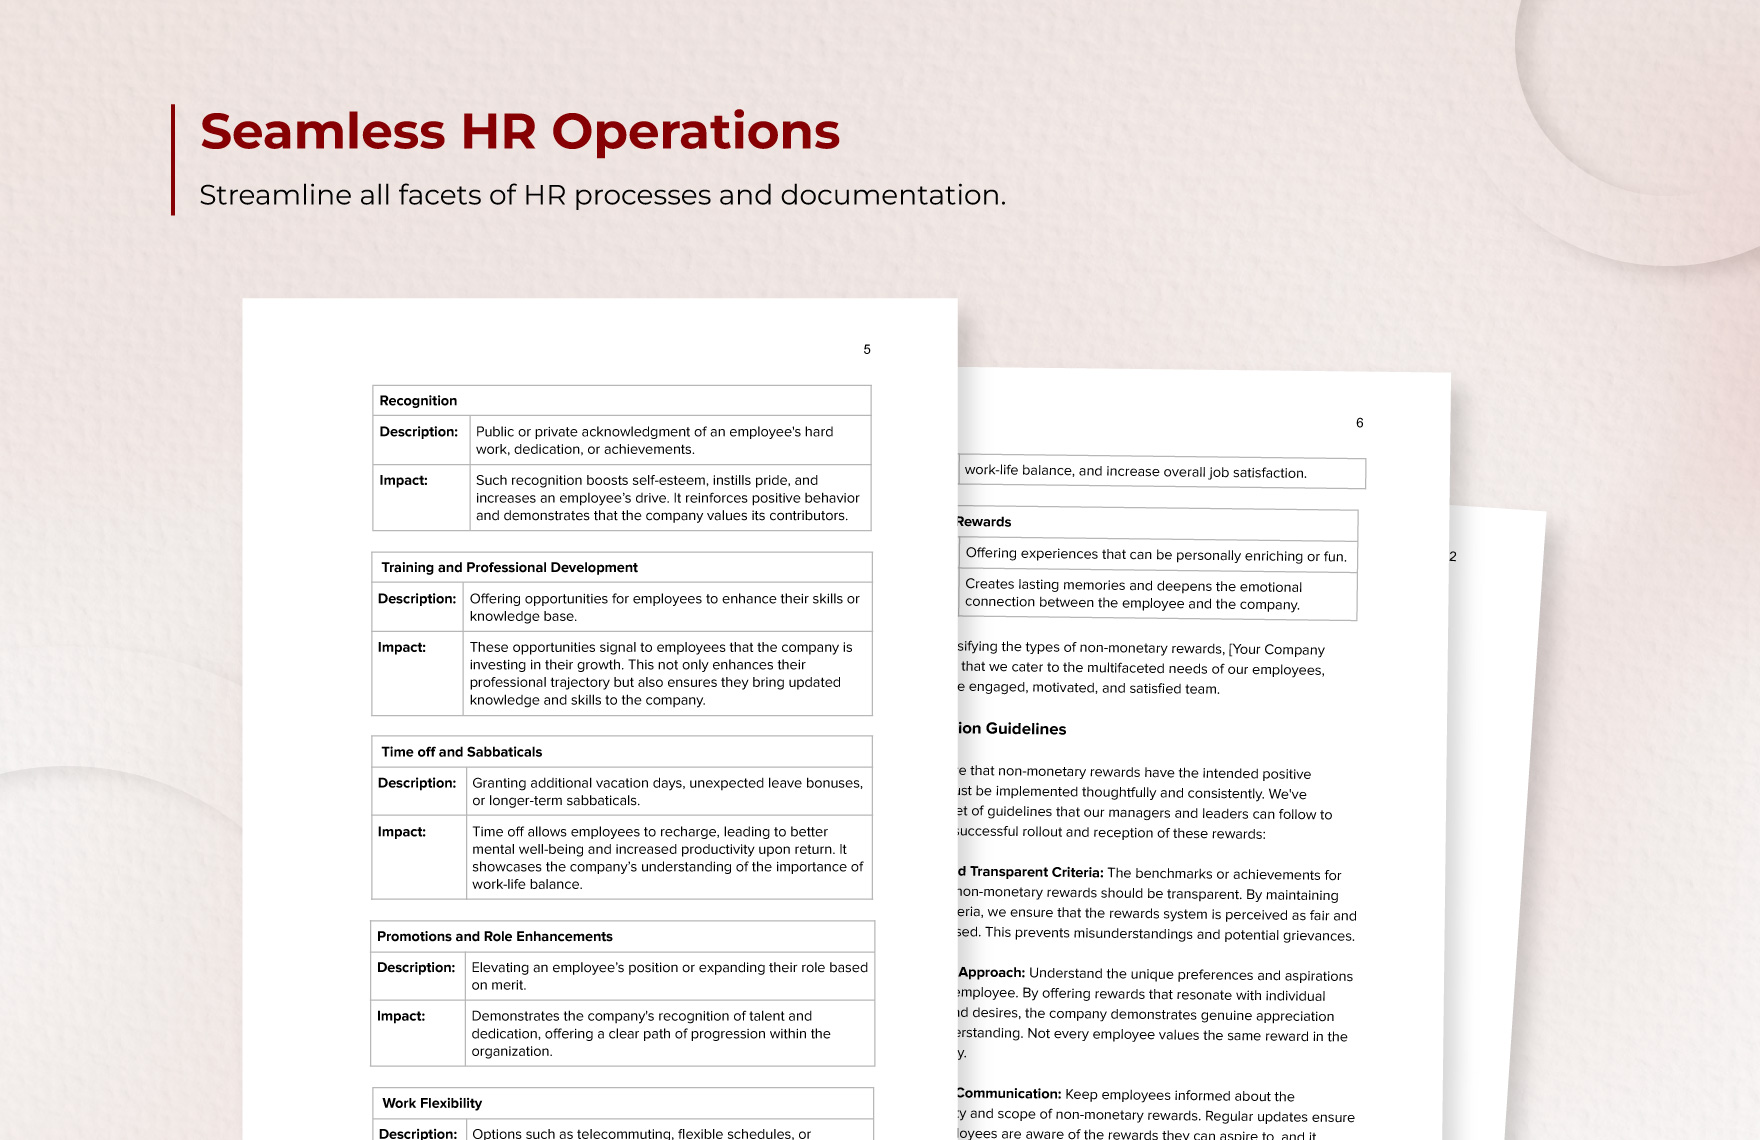 Best Practices Manual for Non-Monetary Rewards HR Template